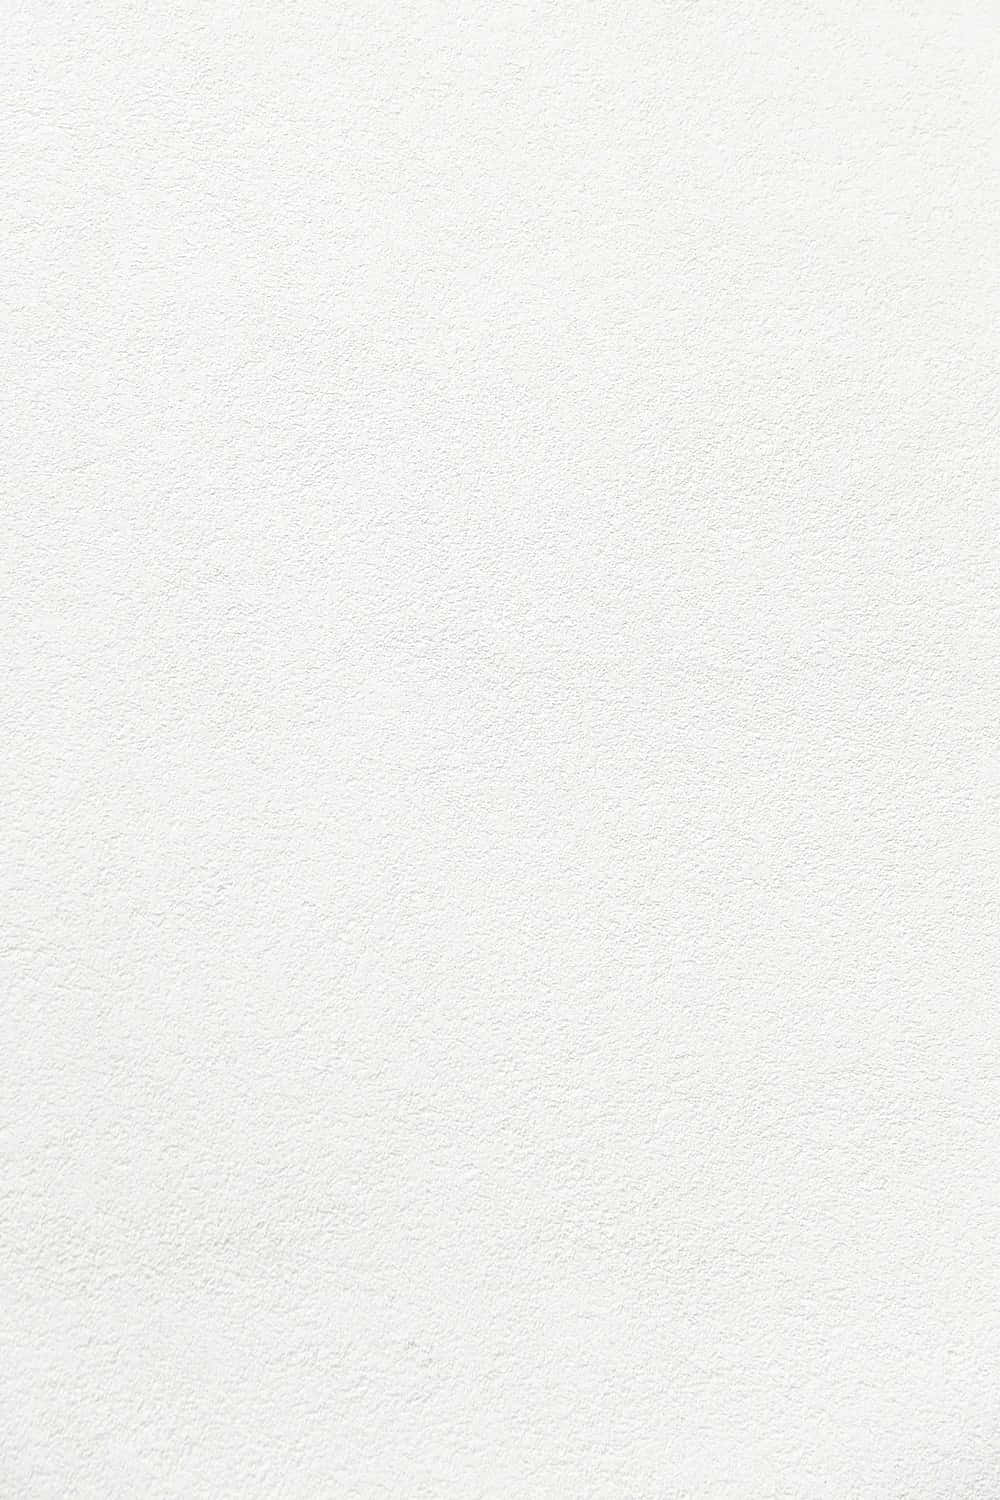 A detailed and ornate seamless paper background.